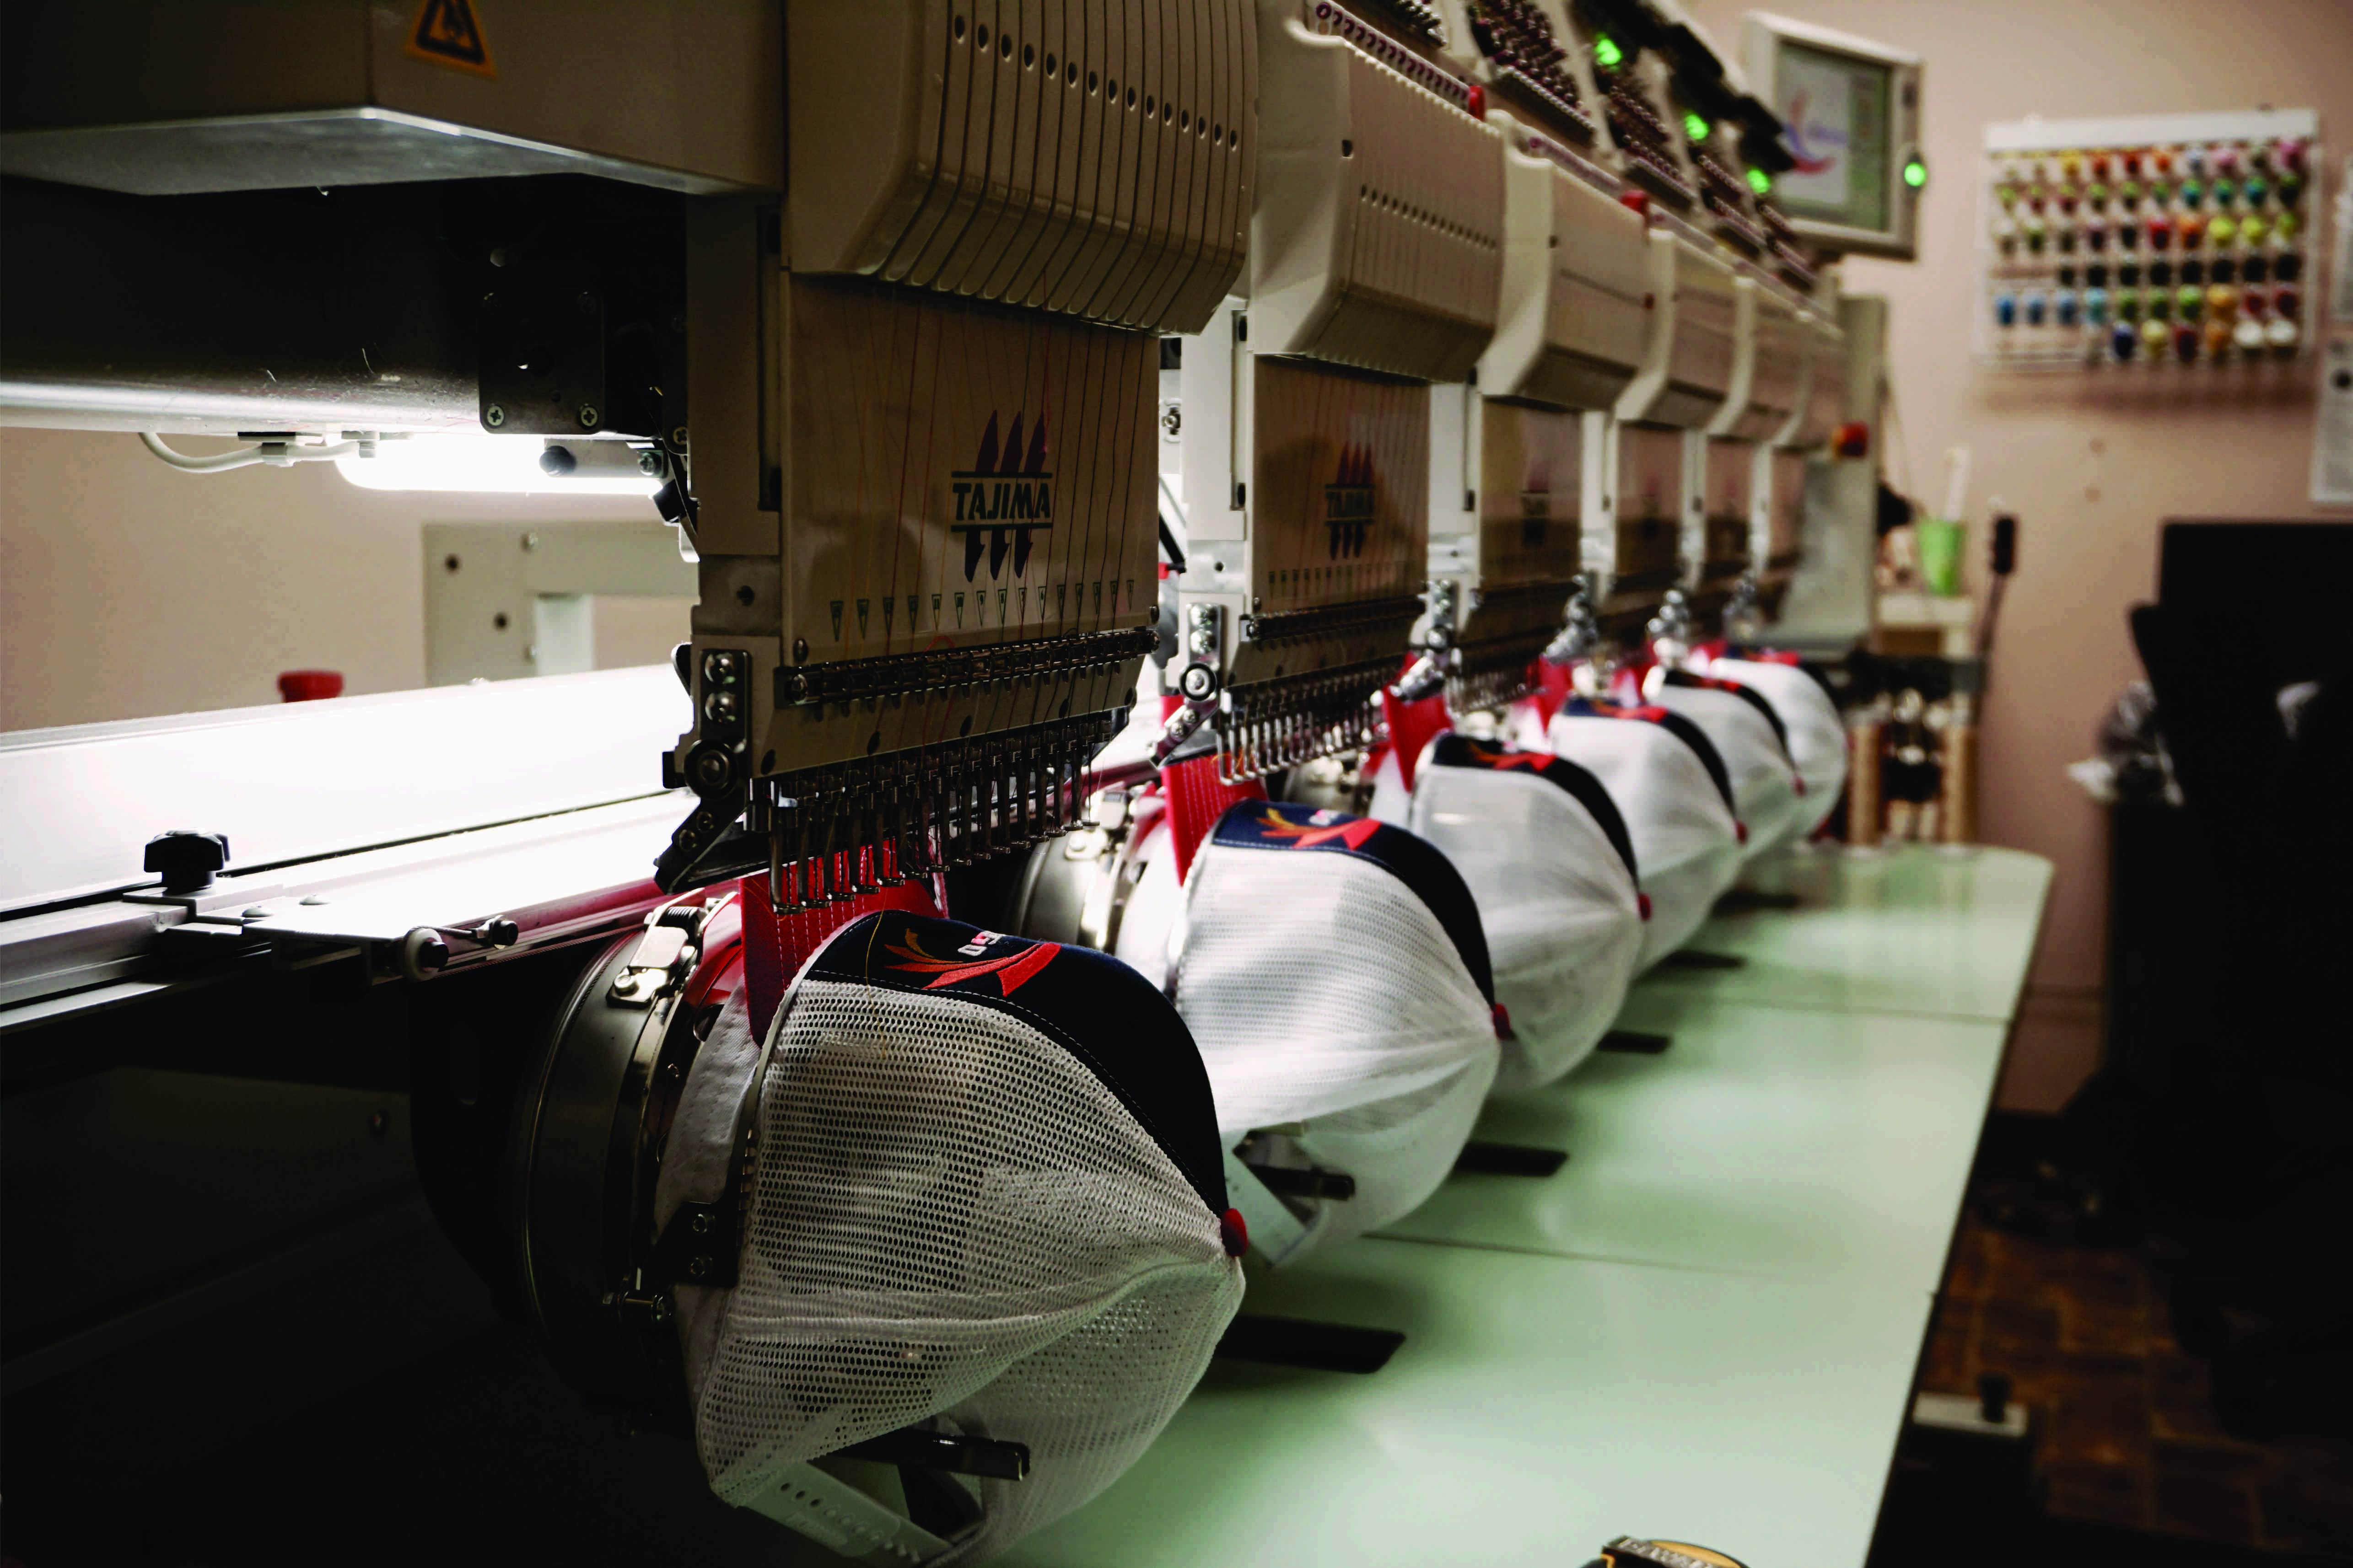 Embroidery machines sewing hats